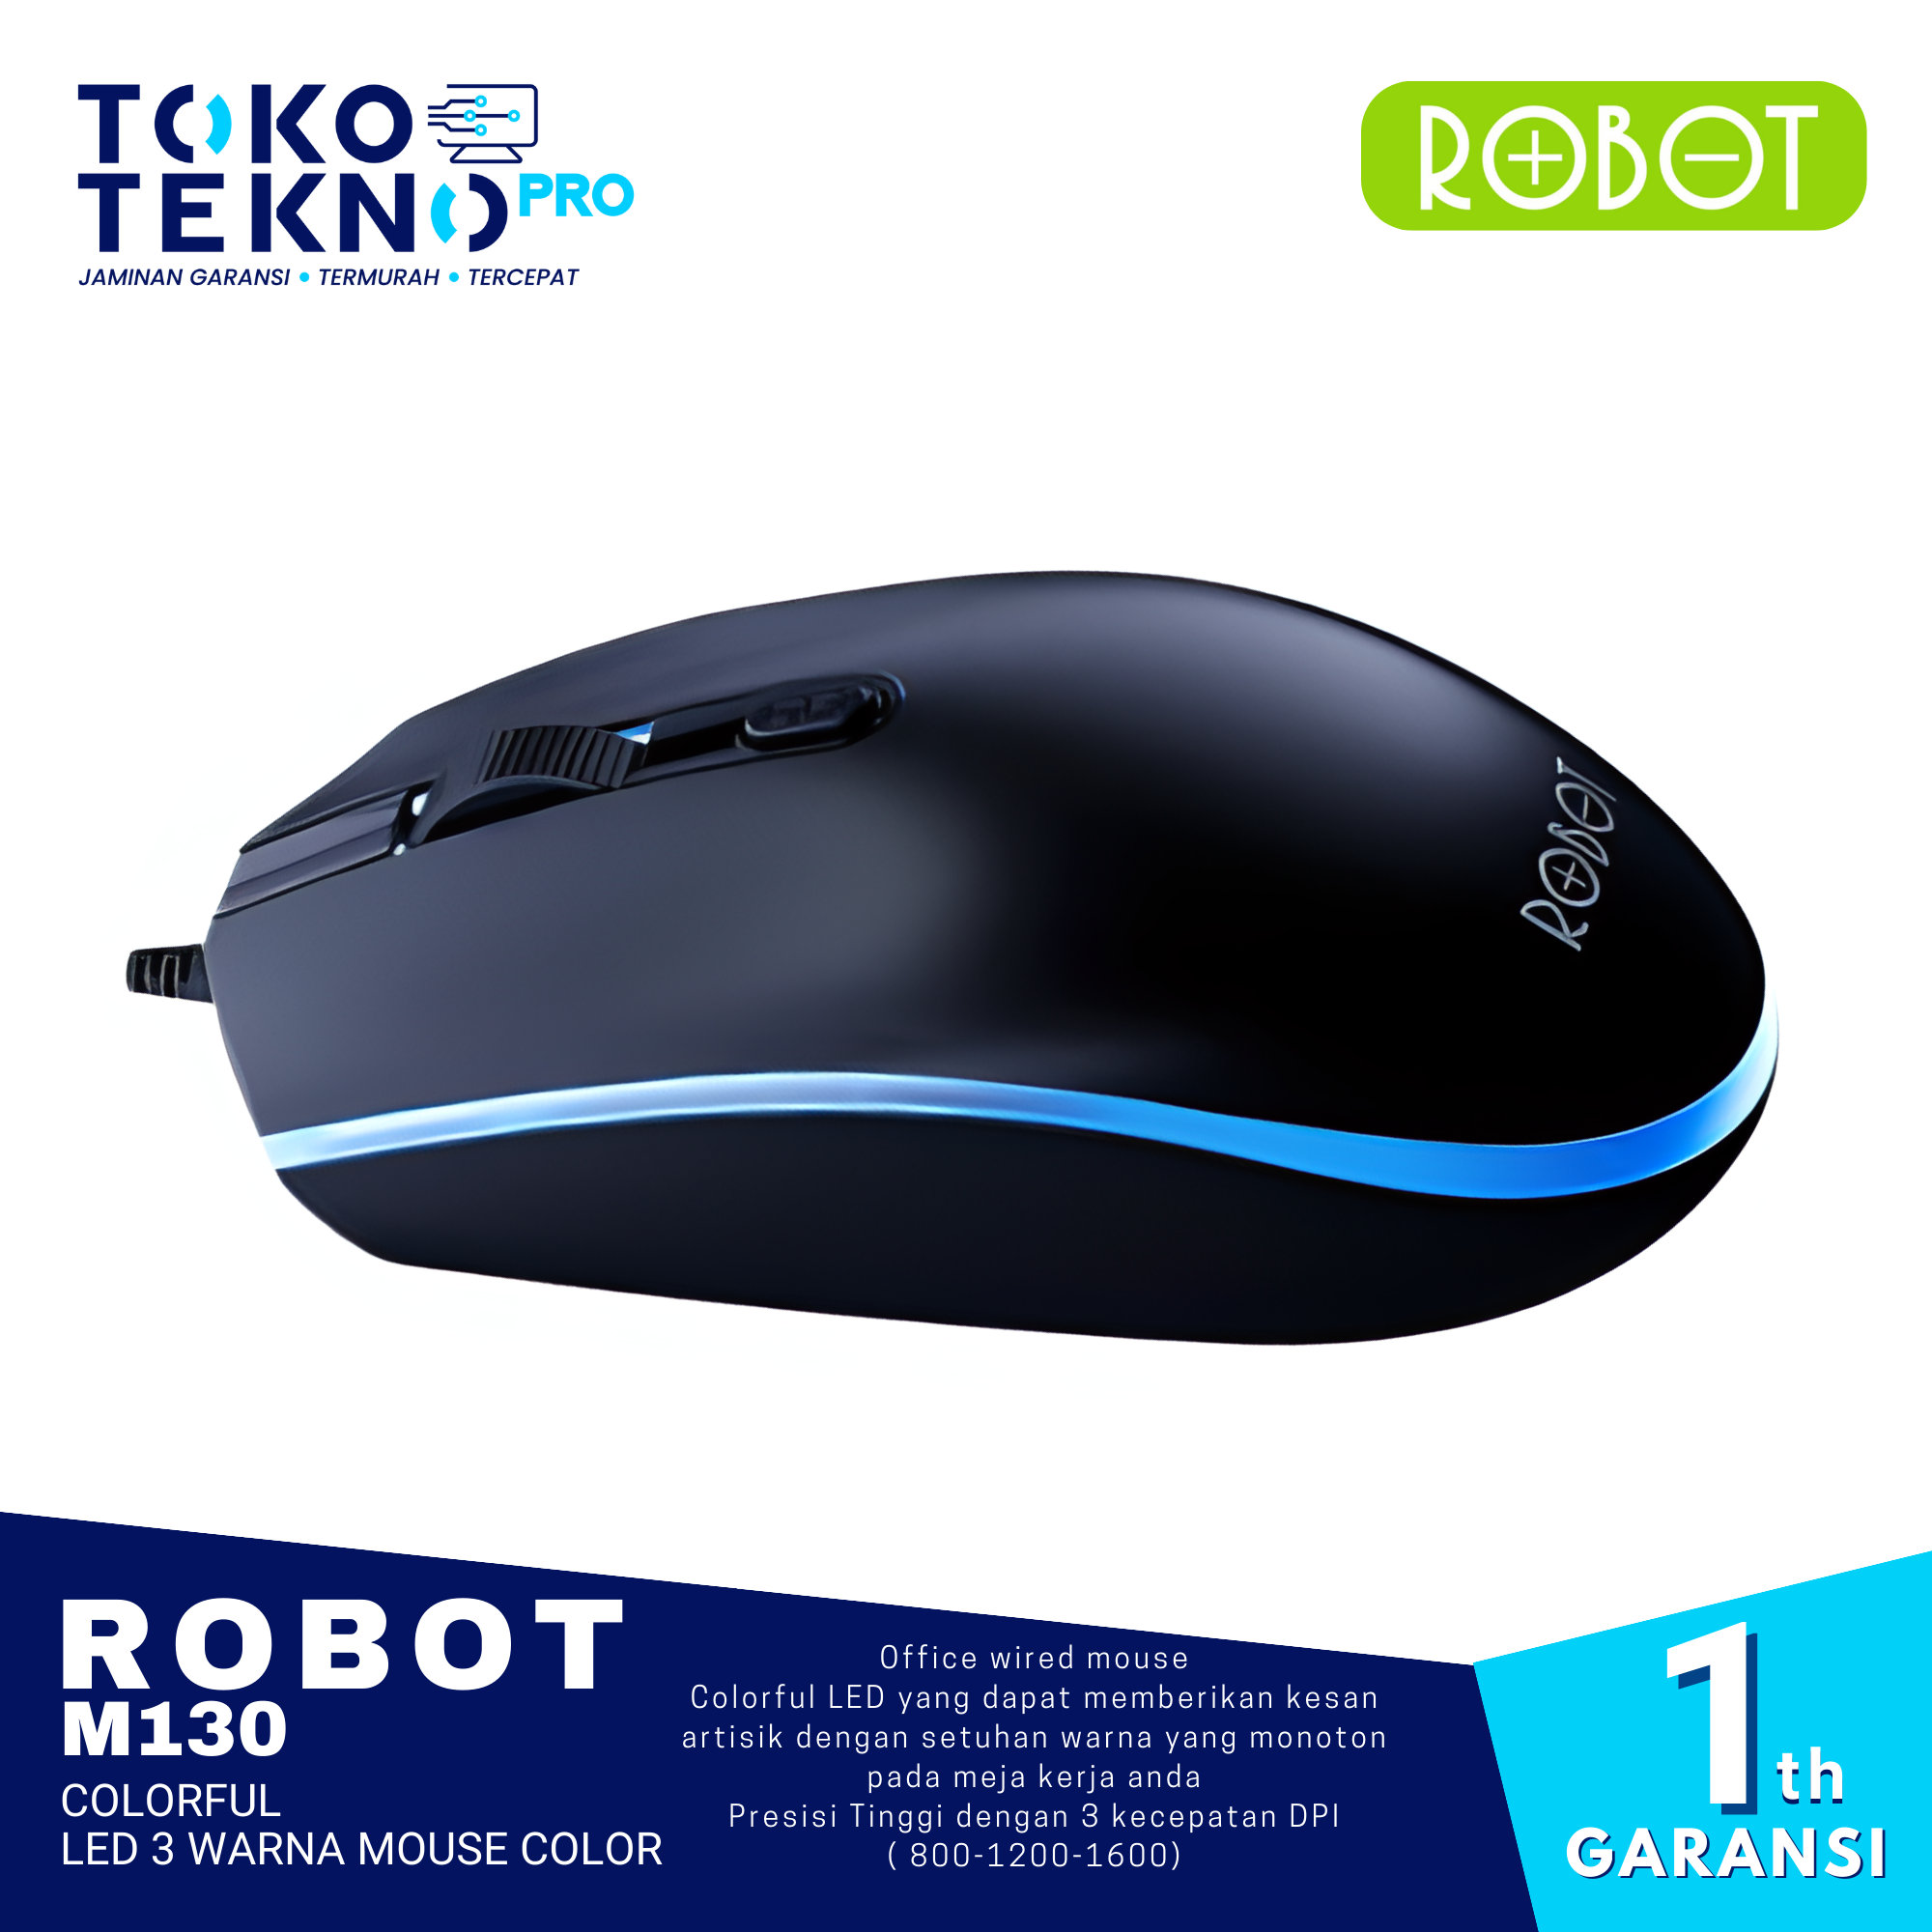 Robot M130 Colorful LED 3 Warna Mouse Color